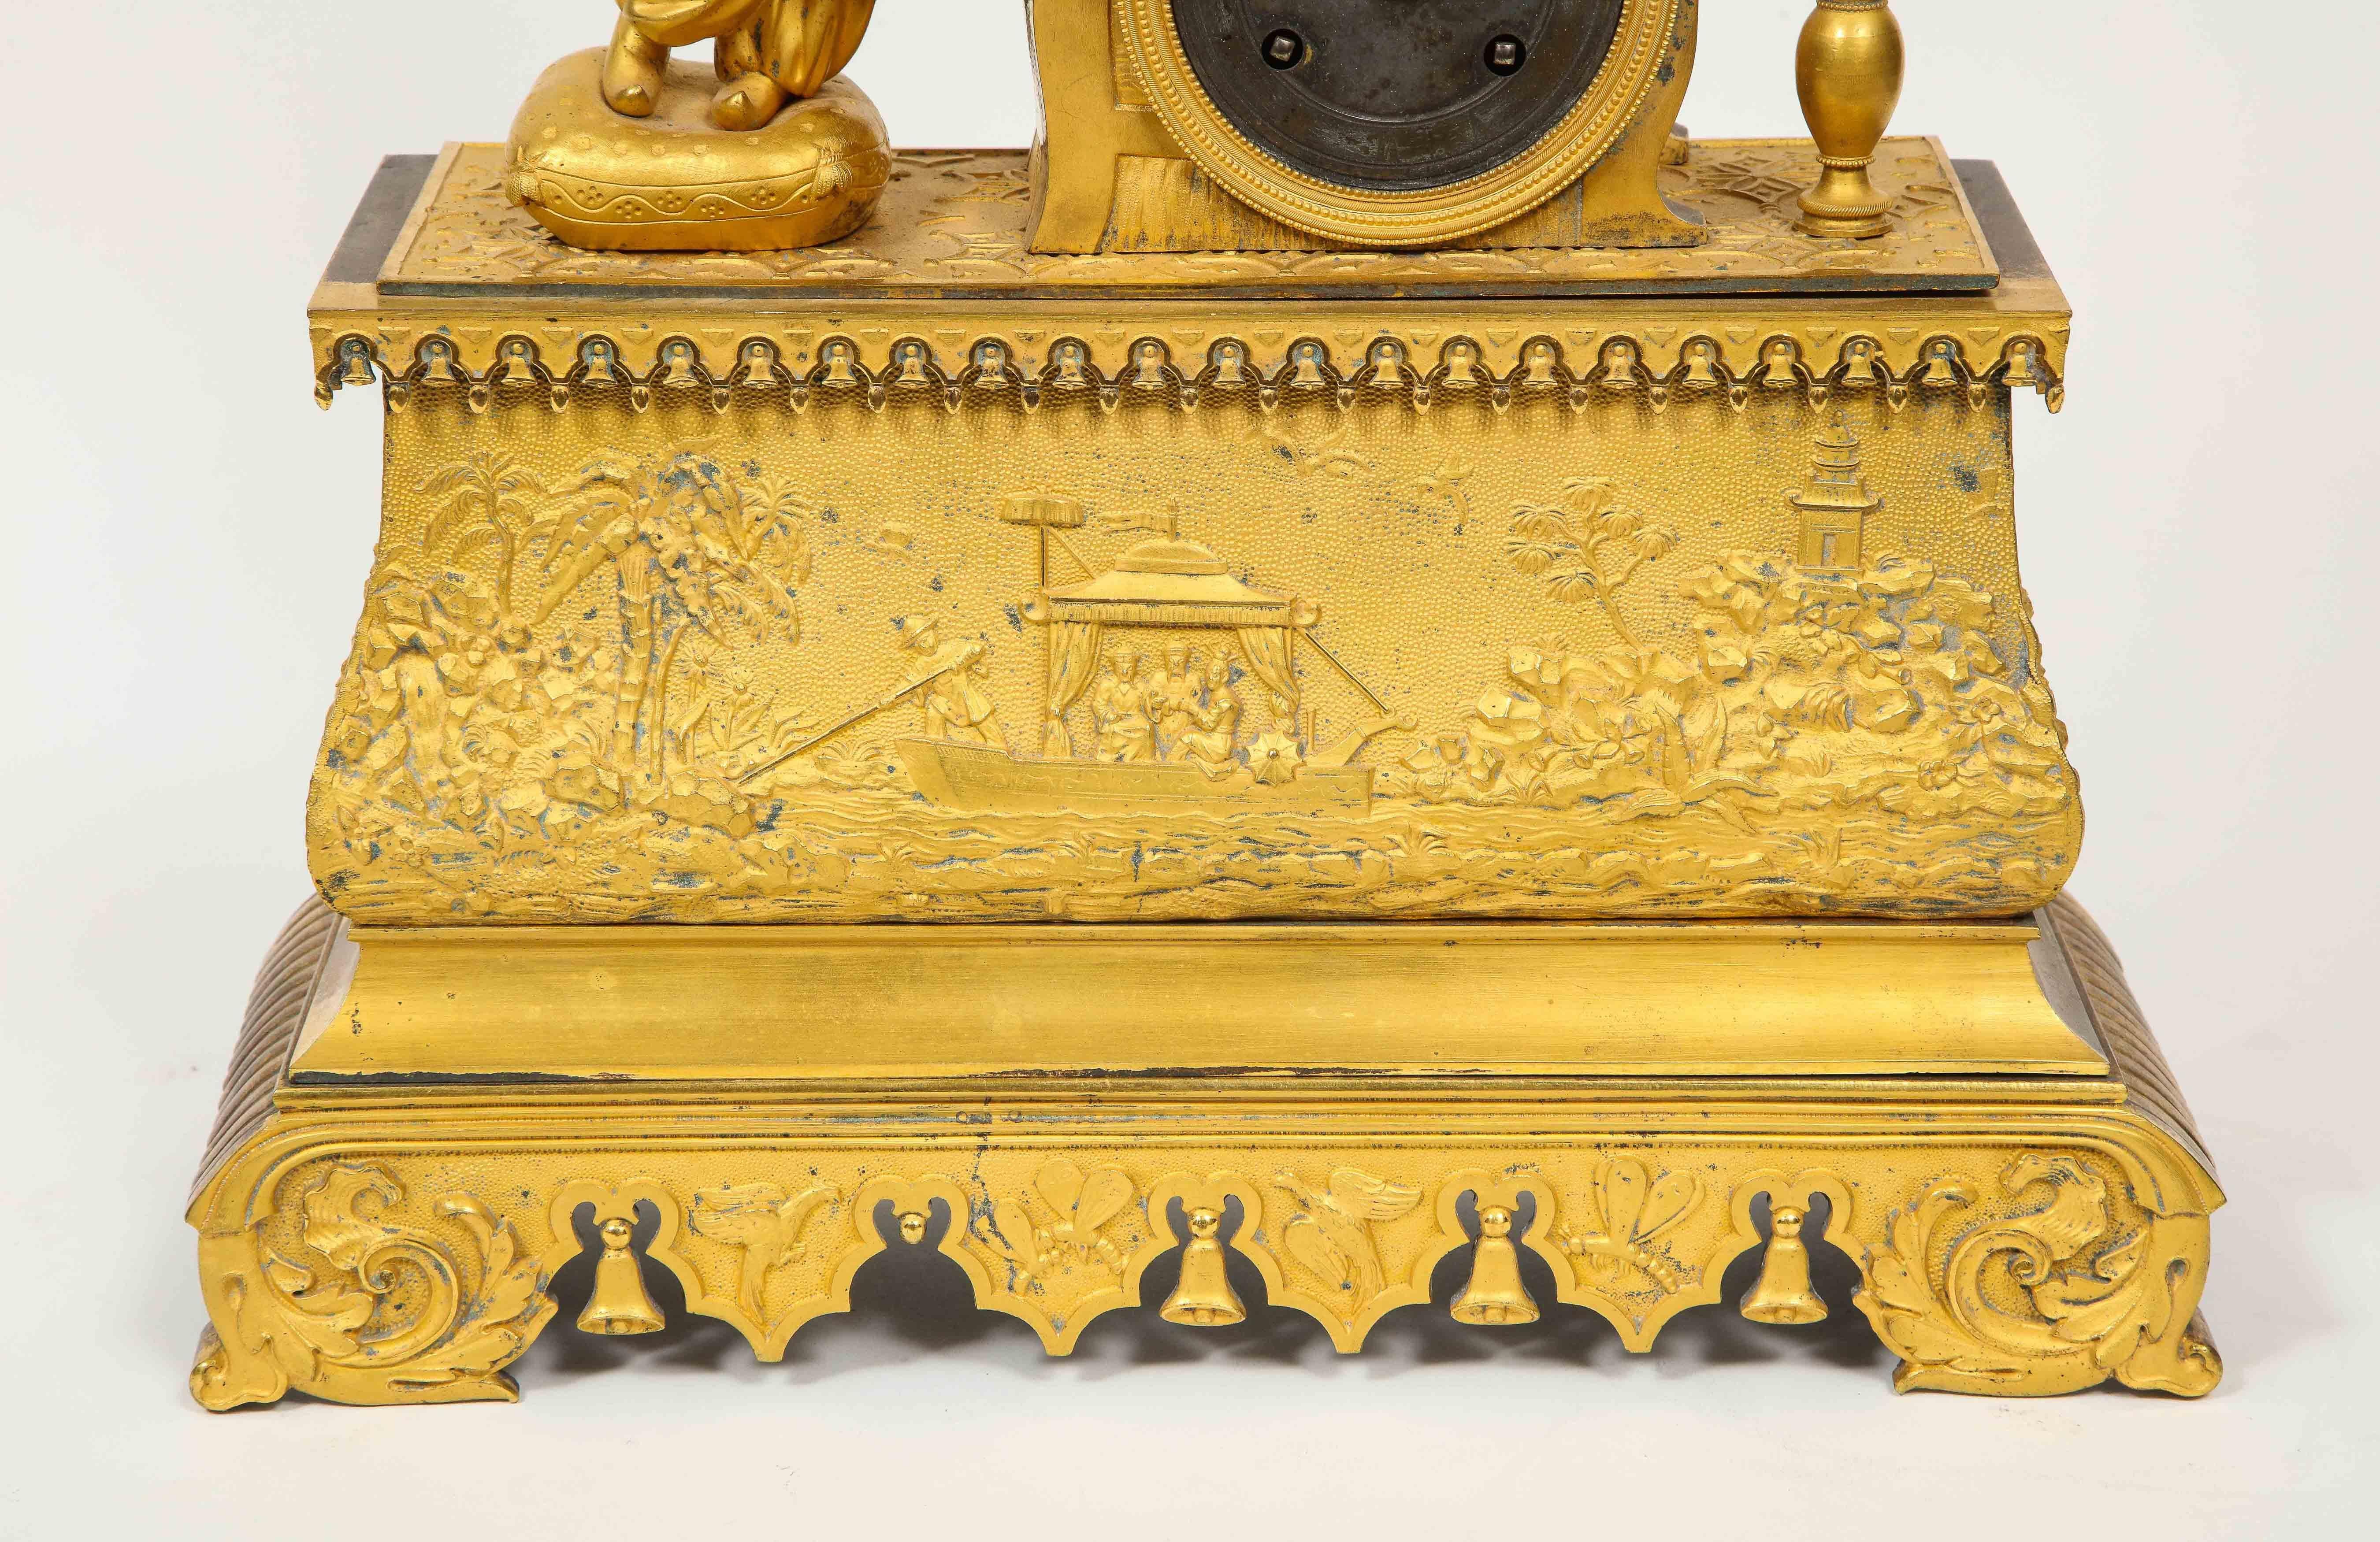 Exquisite French Charles X Ormolu Chinoiserie Figural Table Clock In Good Condition In New York, NY